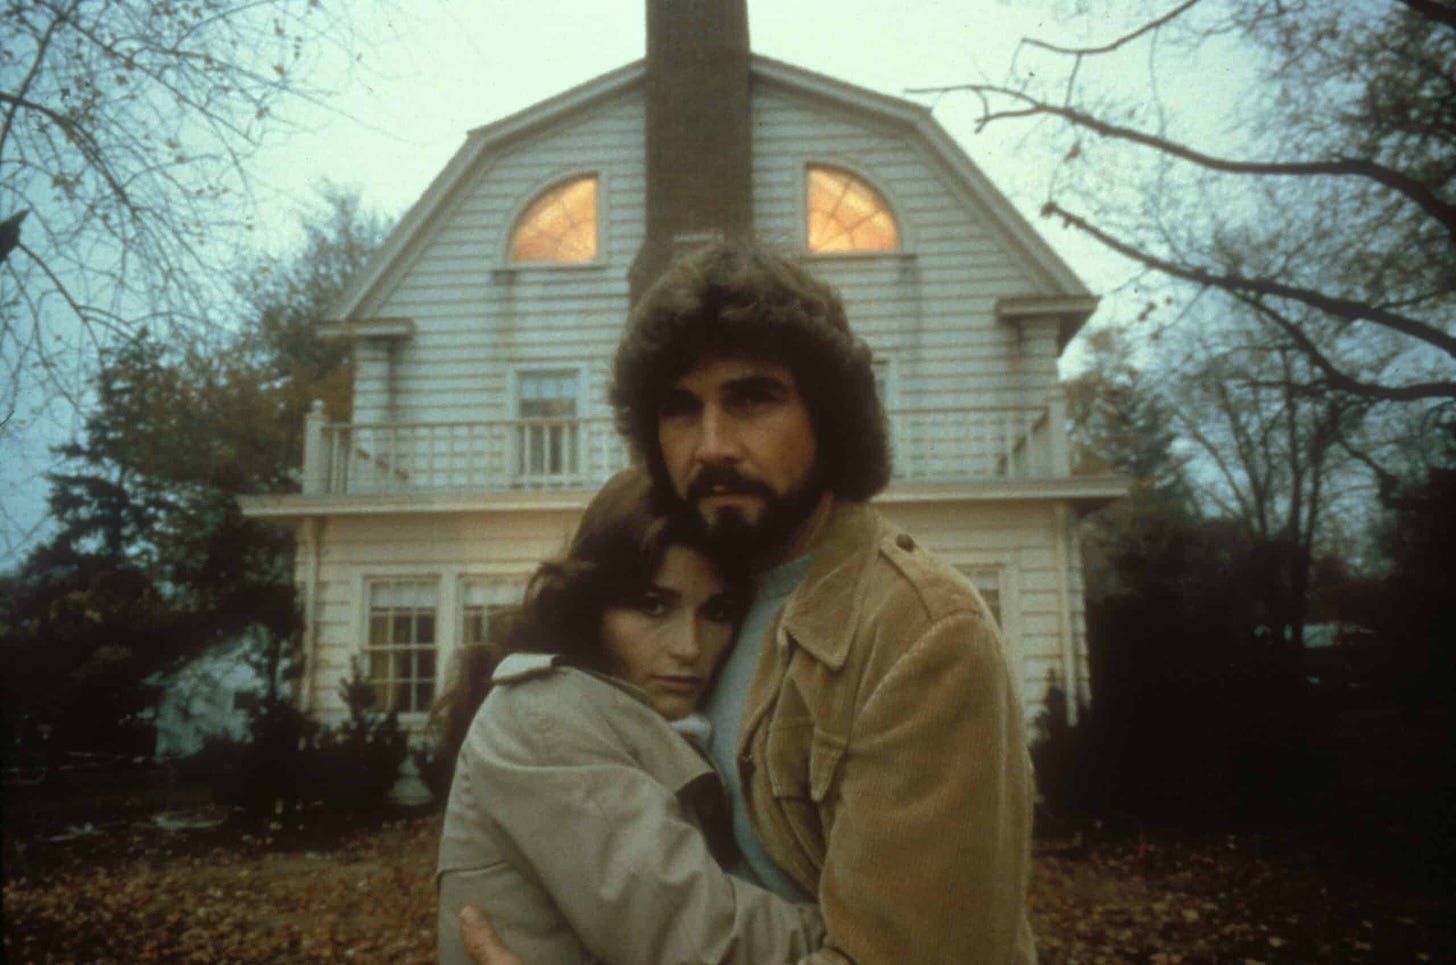 A promotional image from the first Amityville Horror film, with the two stars standing in front of the house